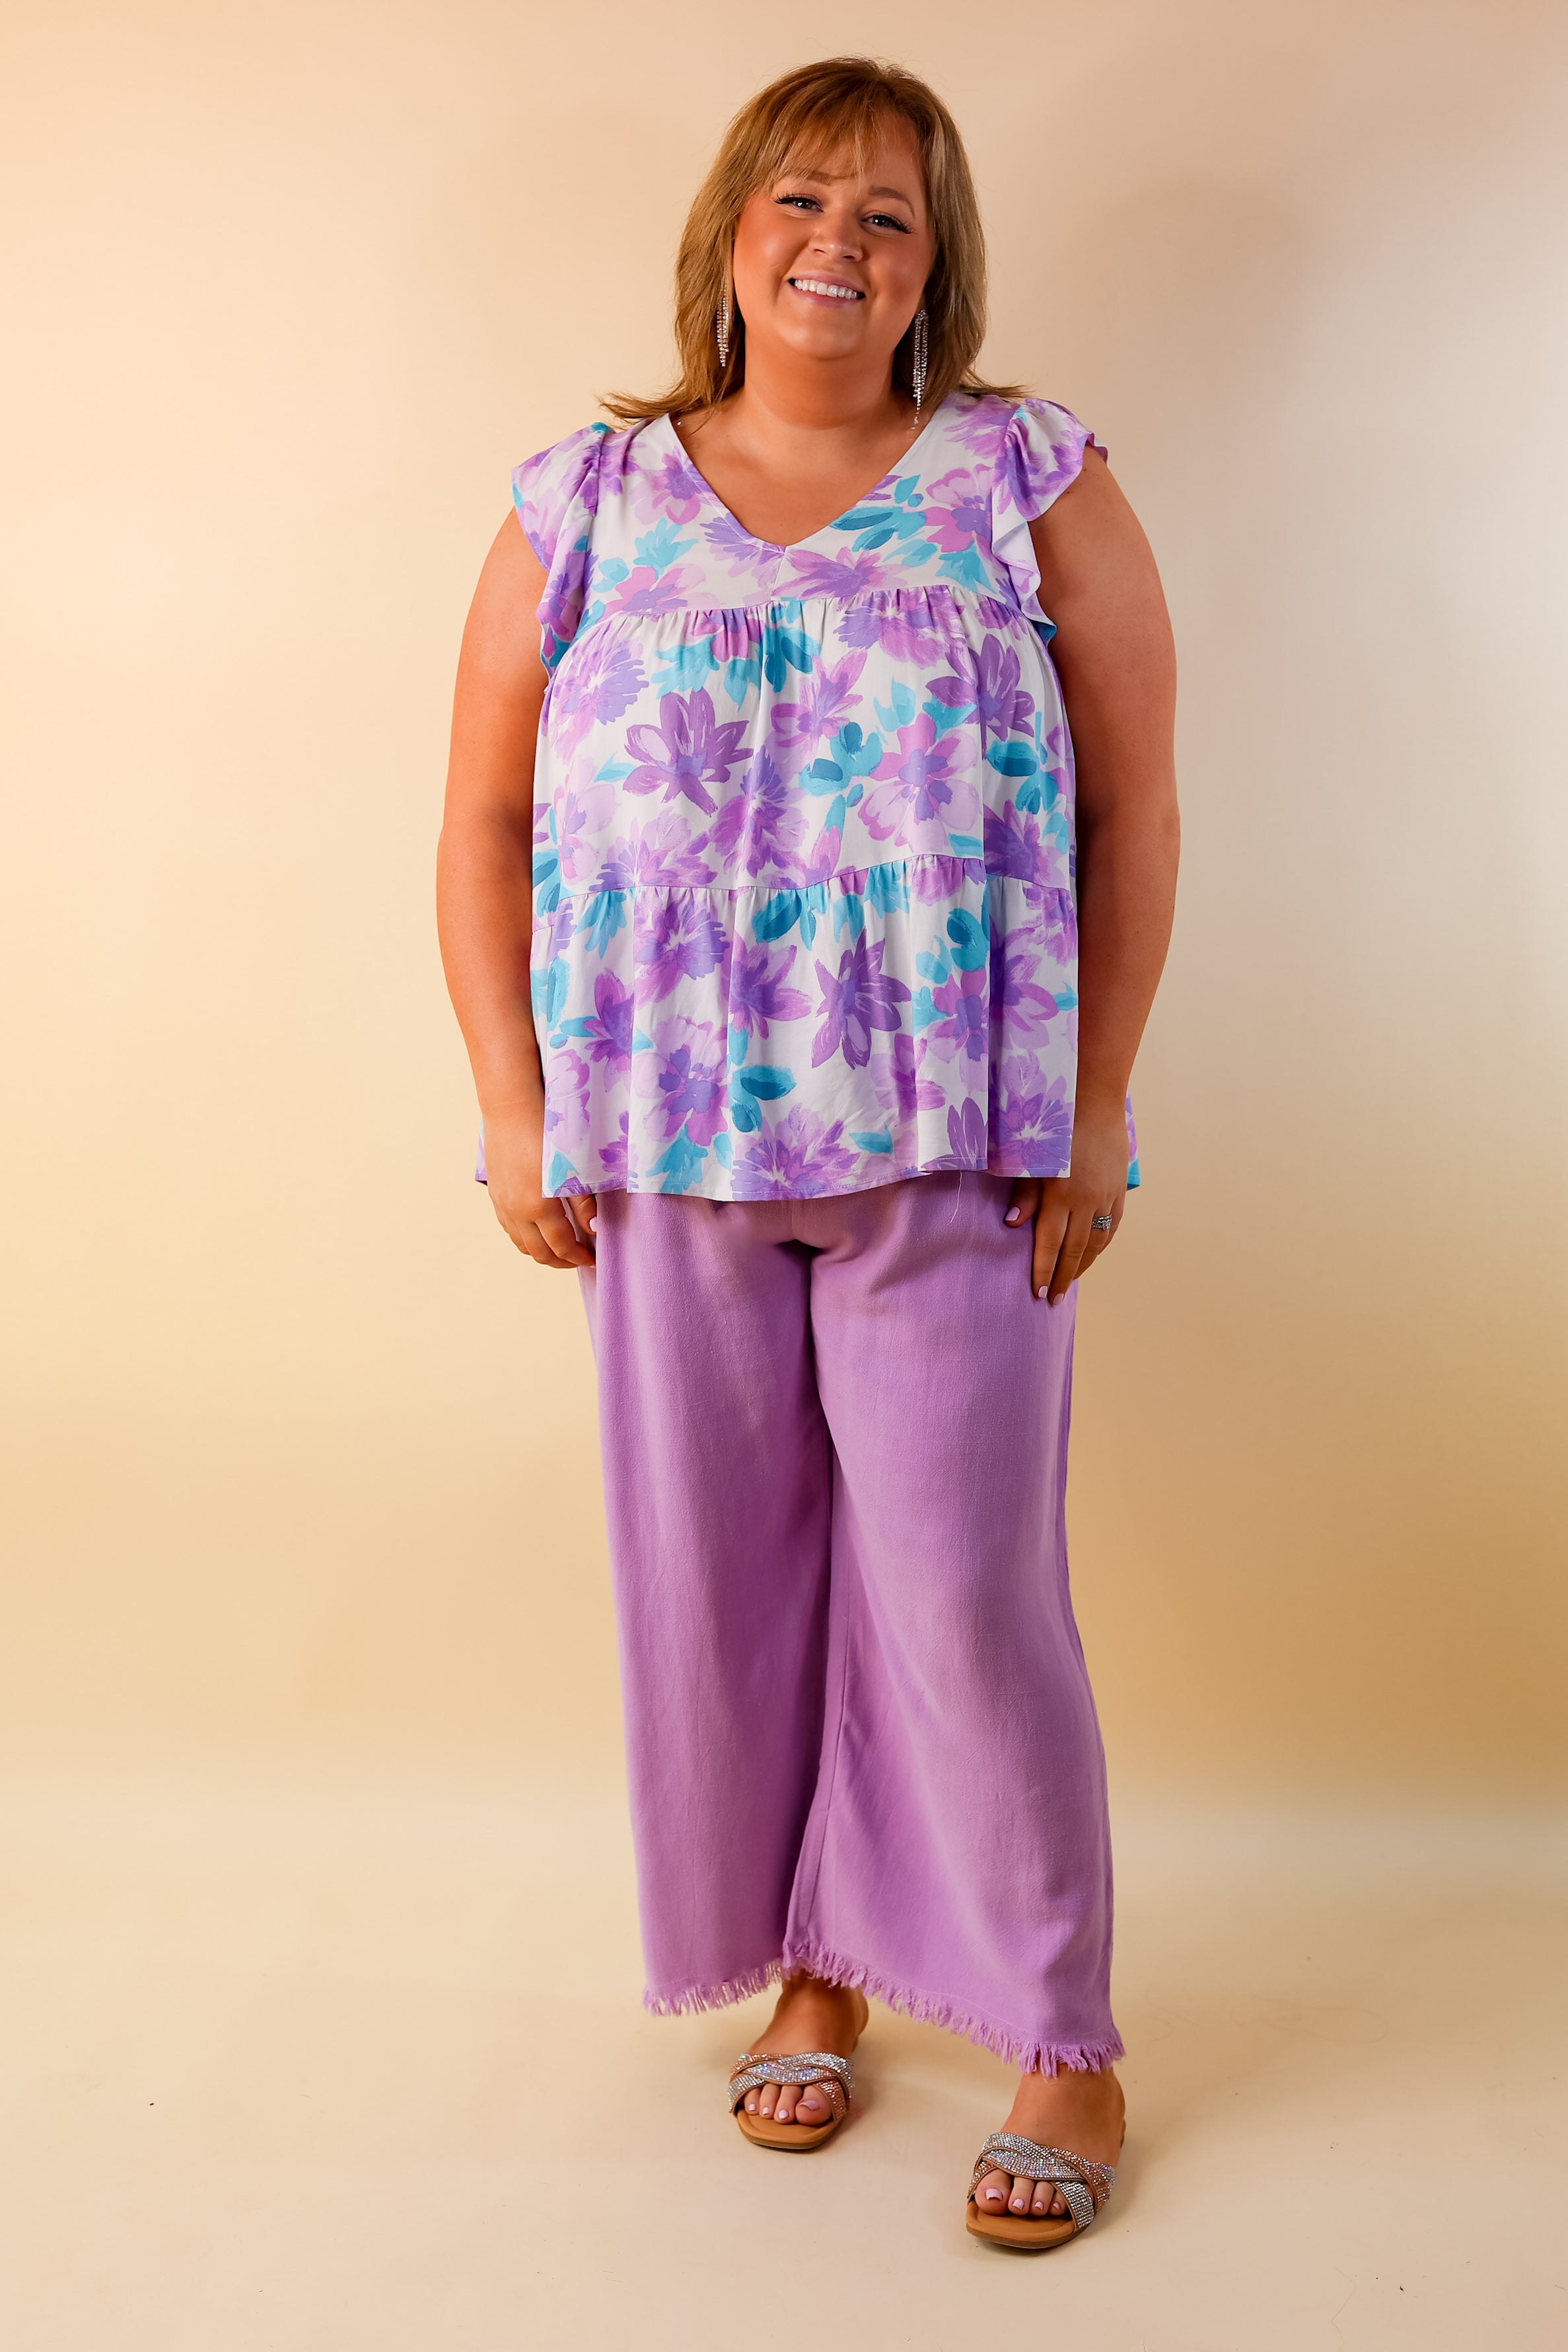 Right On Cue Drawstring Cropped Pants with Frayed Hem in Lavender Purple - Giddy Up Glamour Boutique